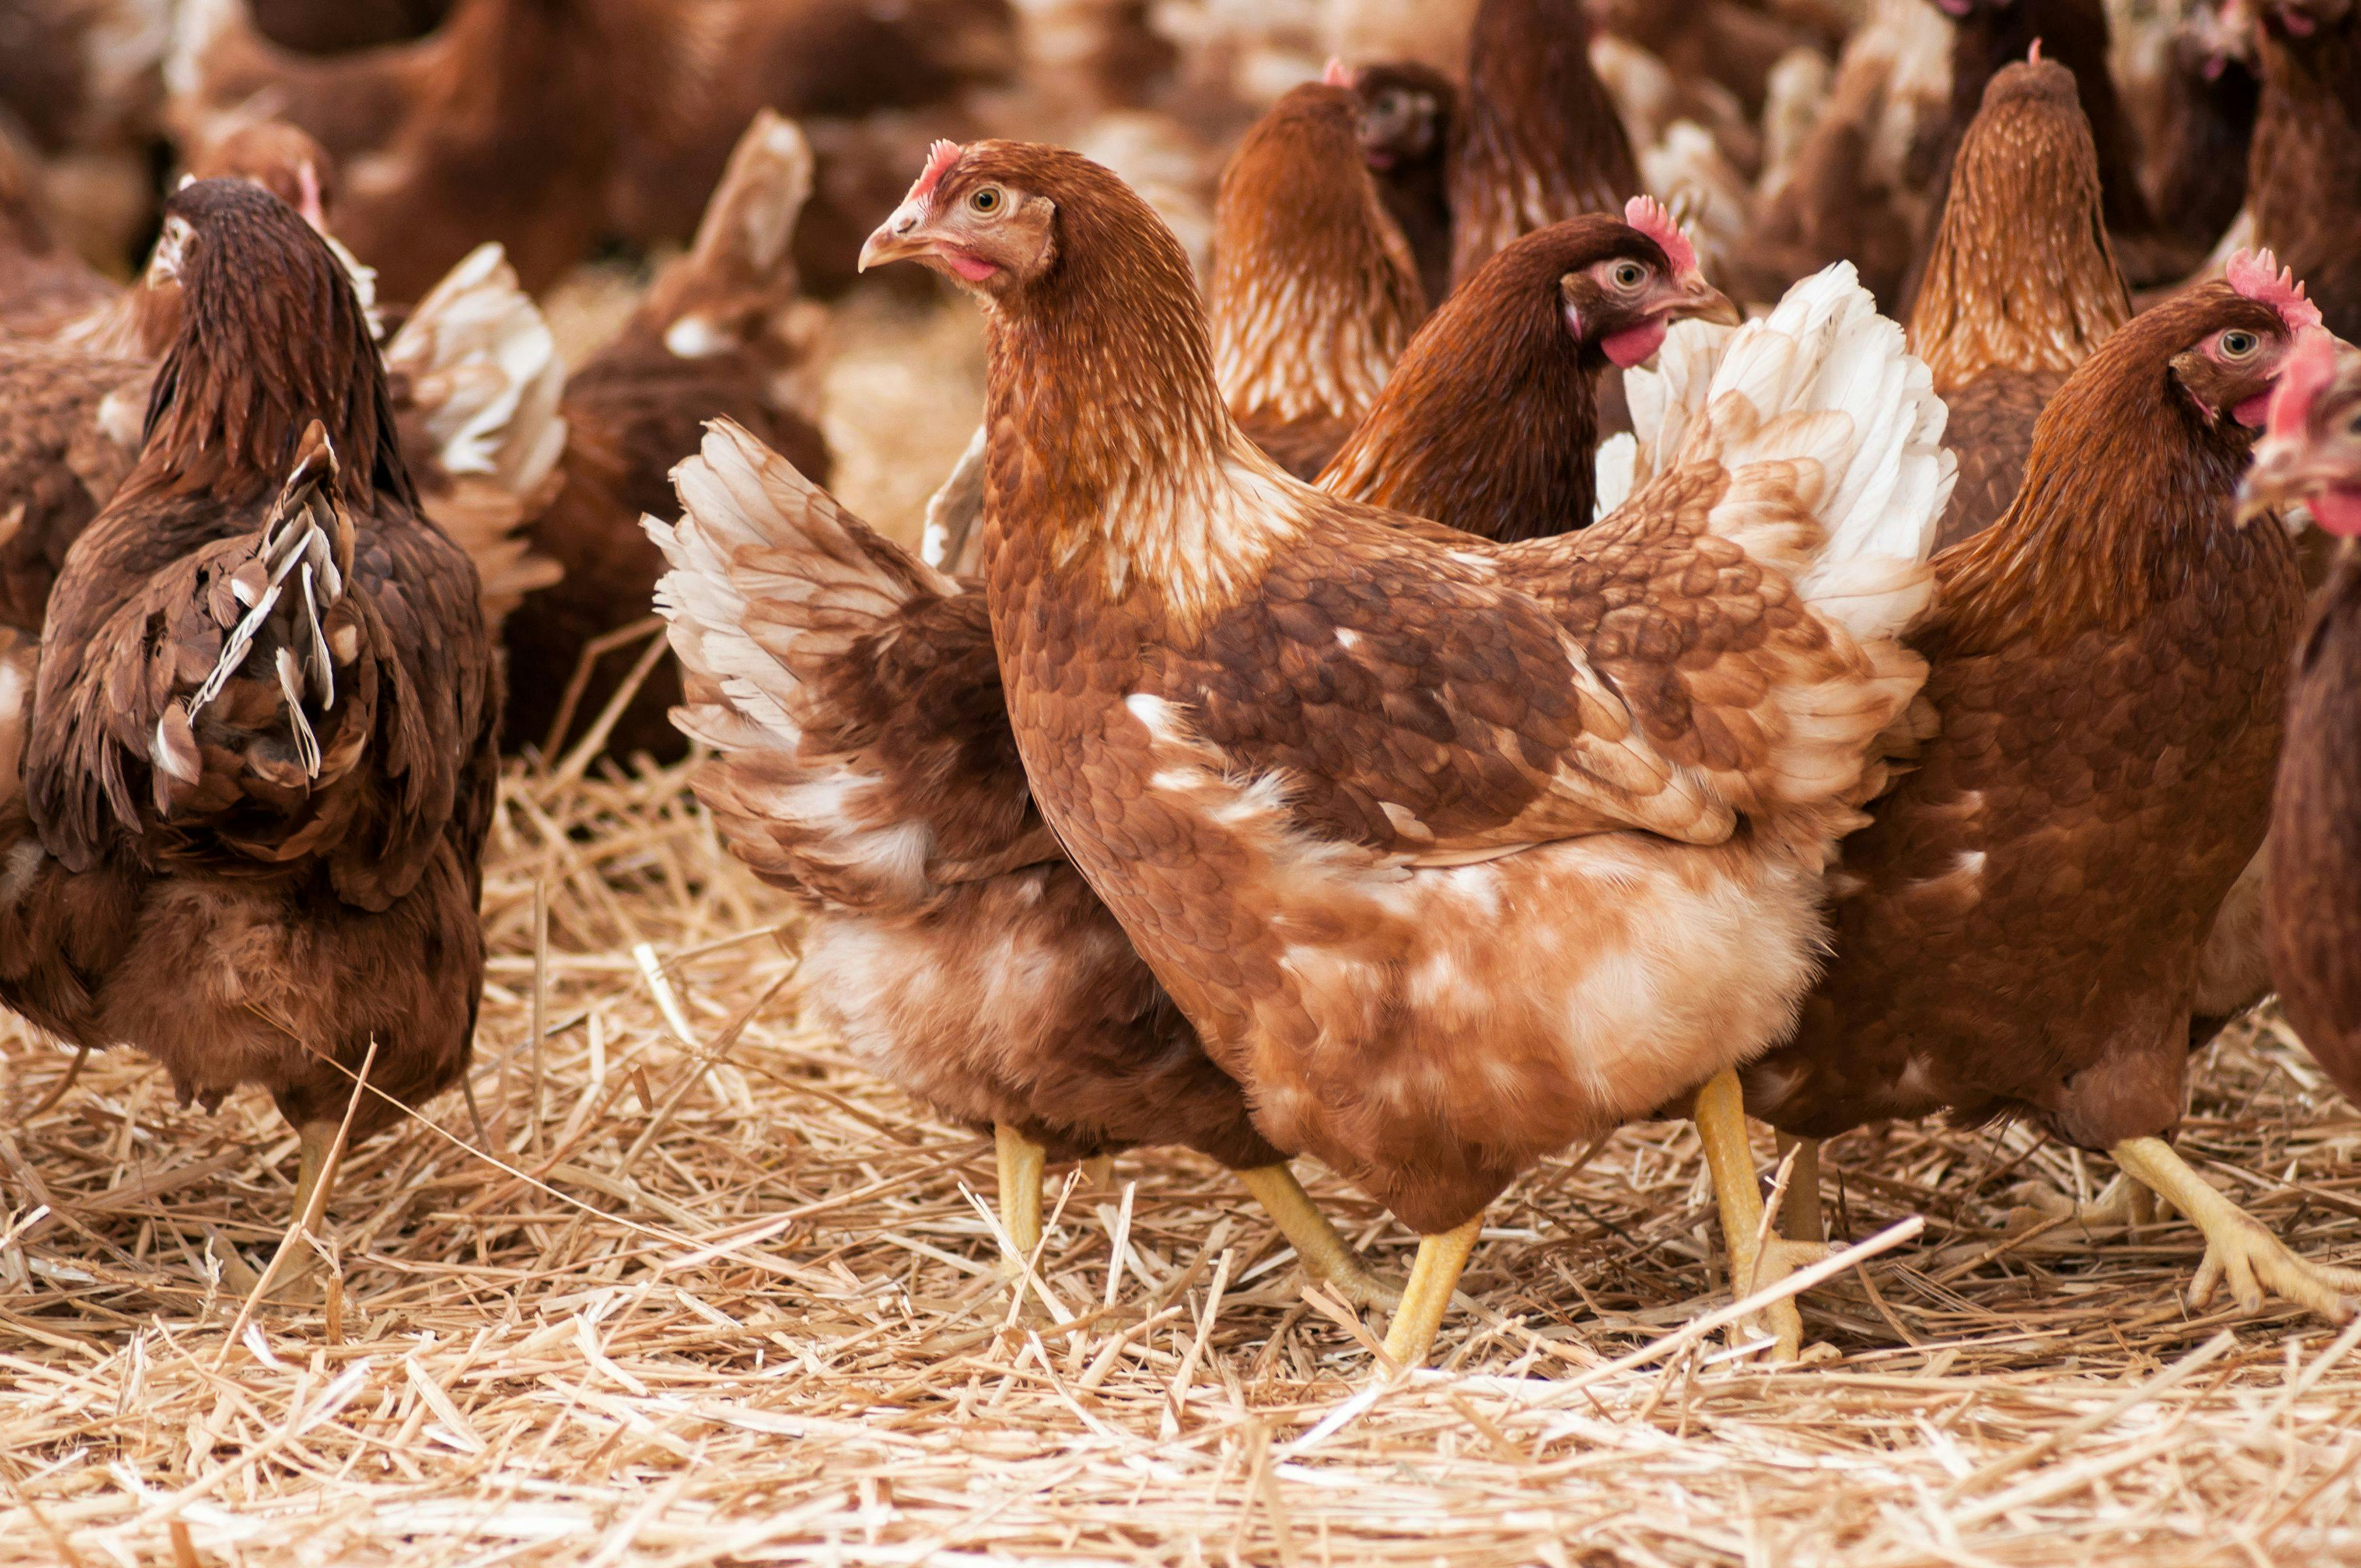 New avian influenza test could help protect poultry and public health